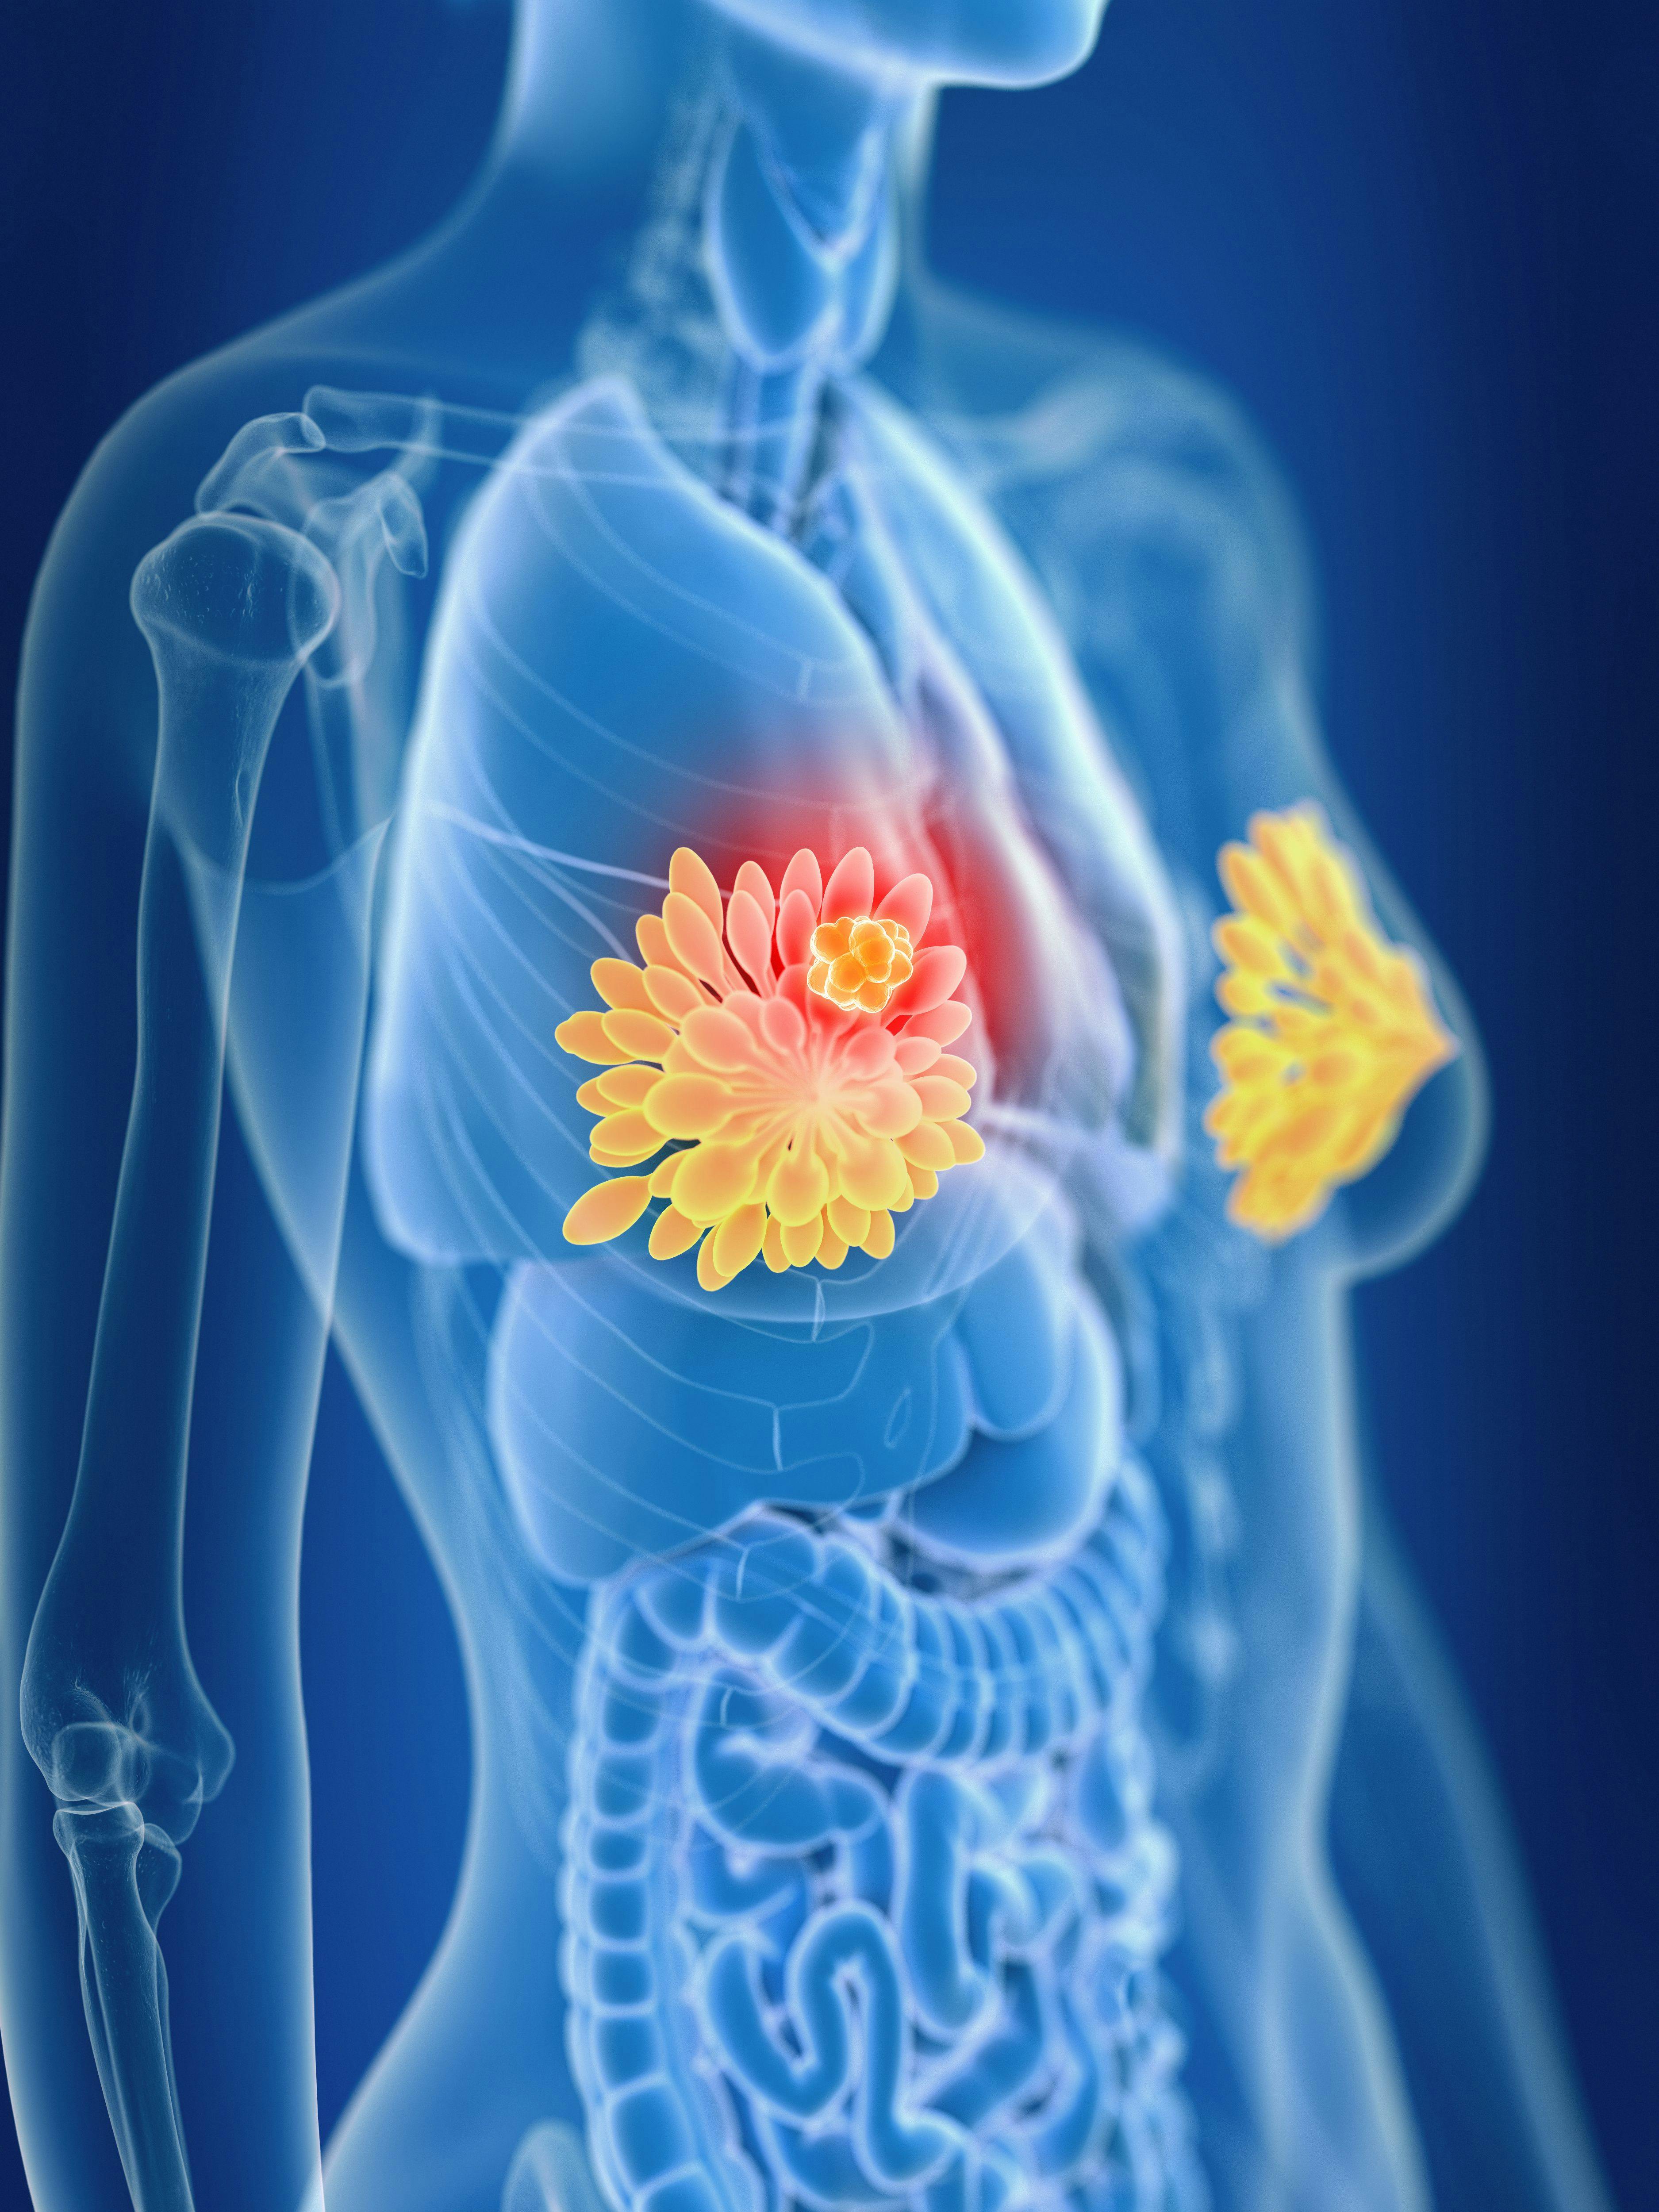 3d rendered medically accurate illustration of a breast cancer: © SciePro - stock.adobe.com